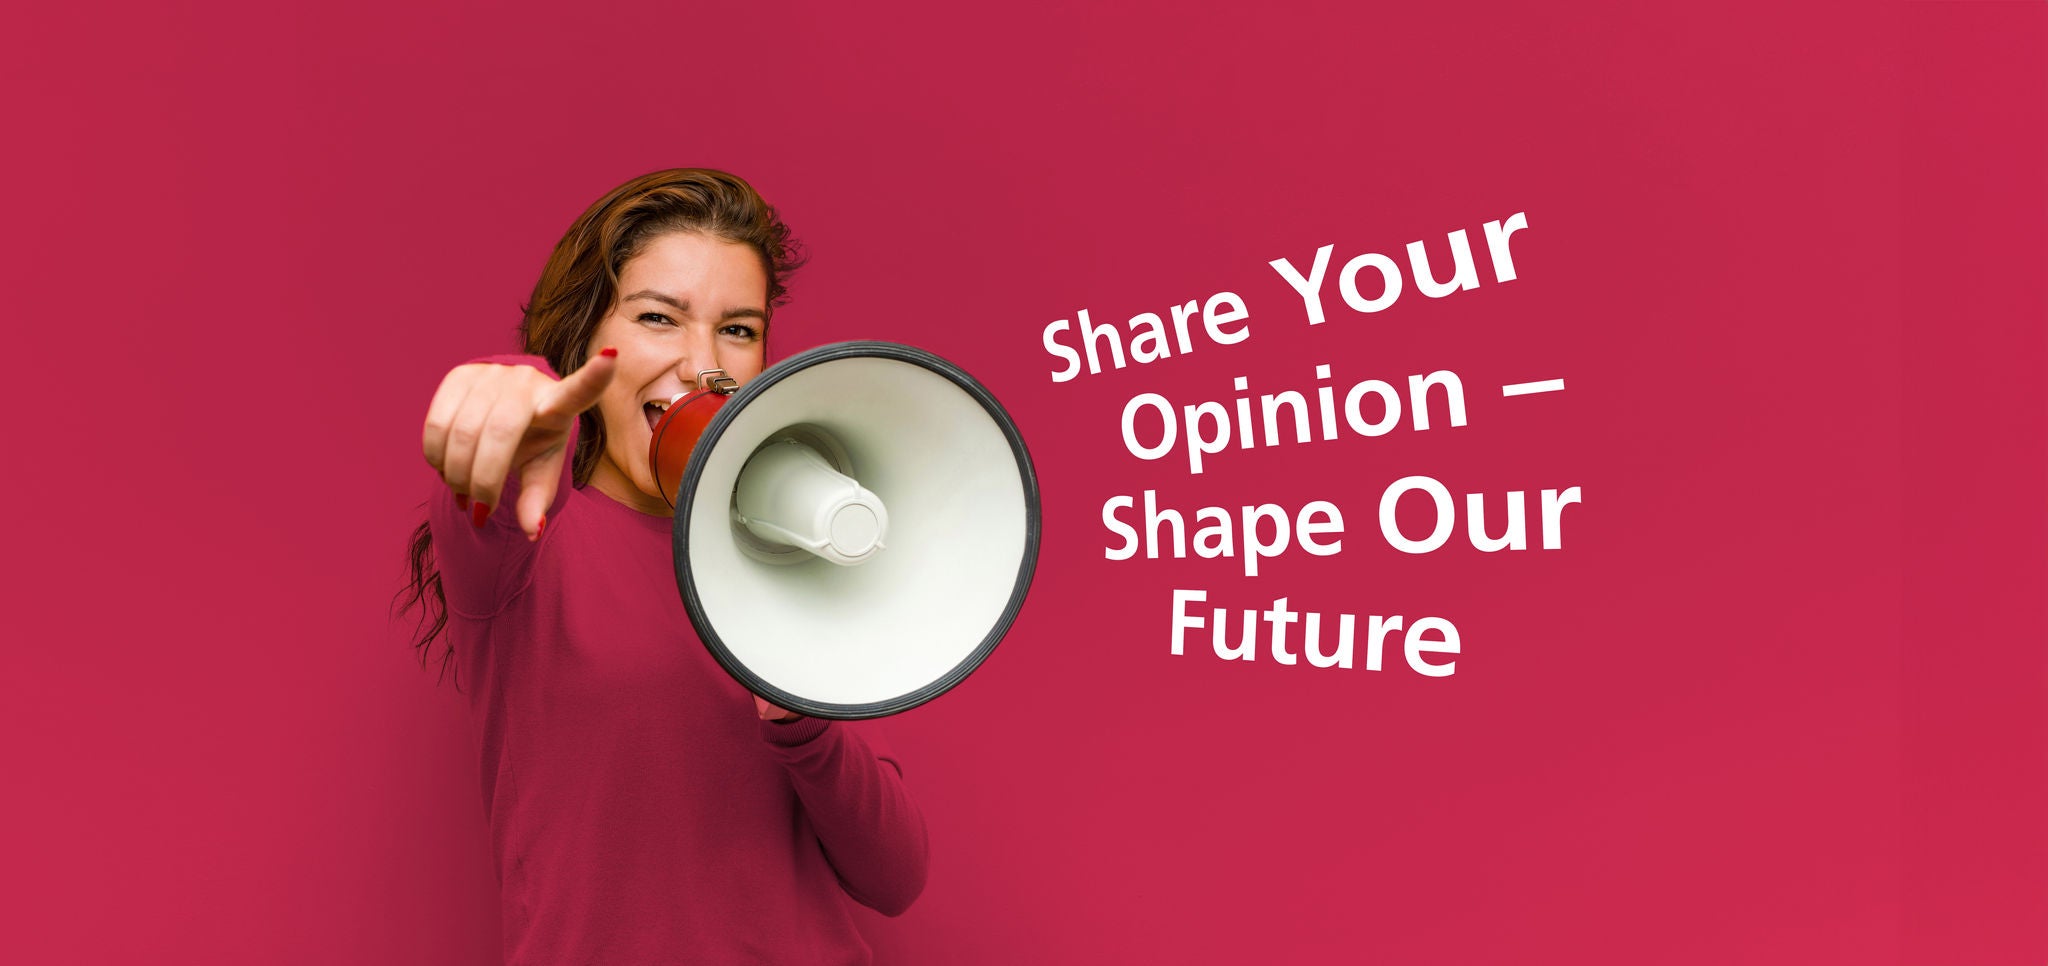 Share your opinion - shape our future